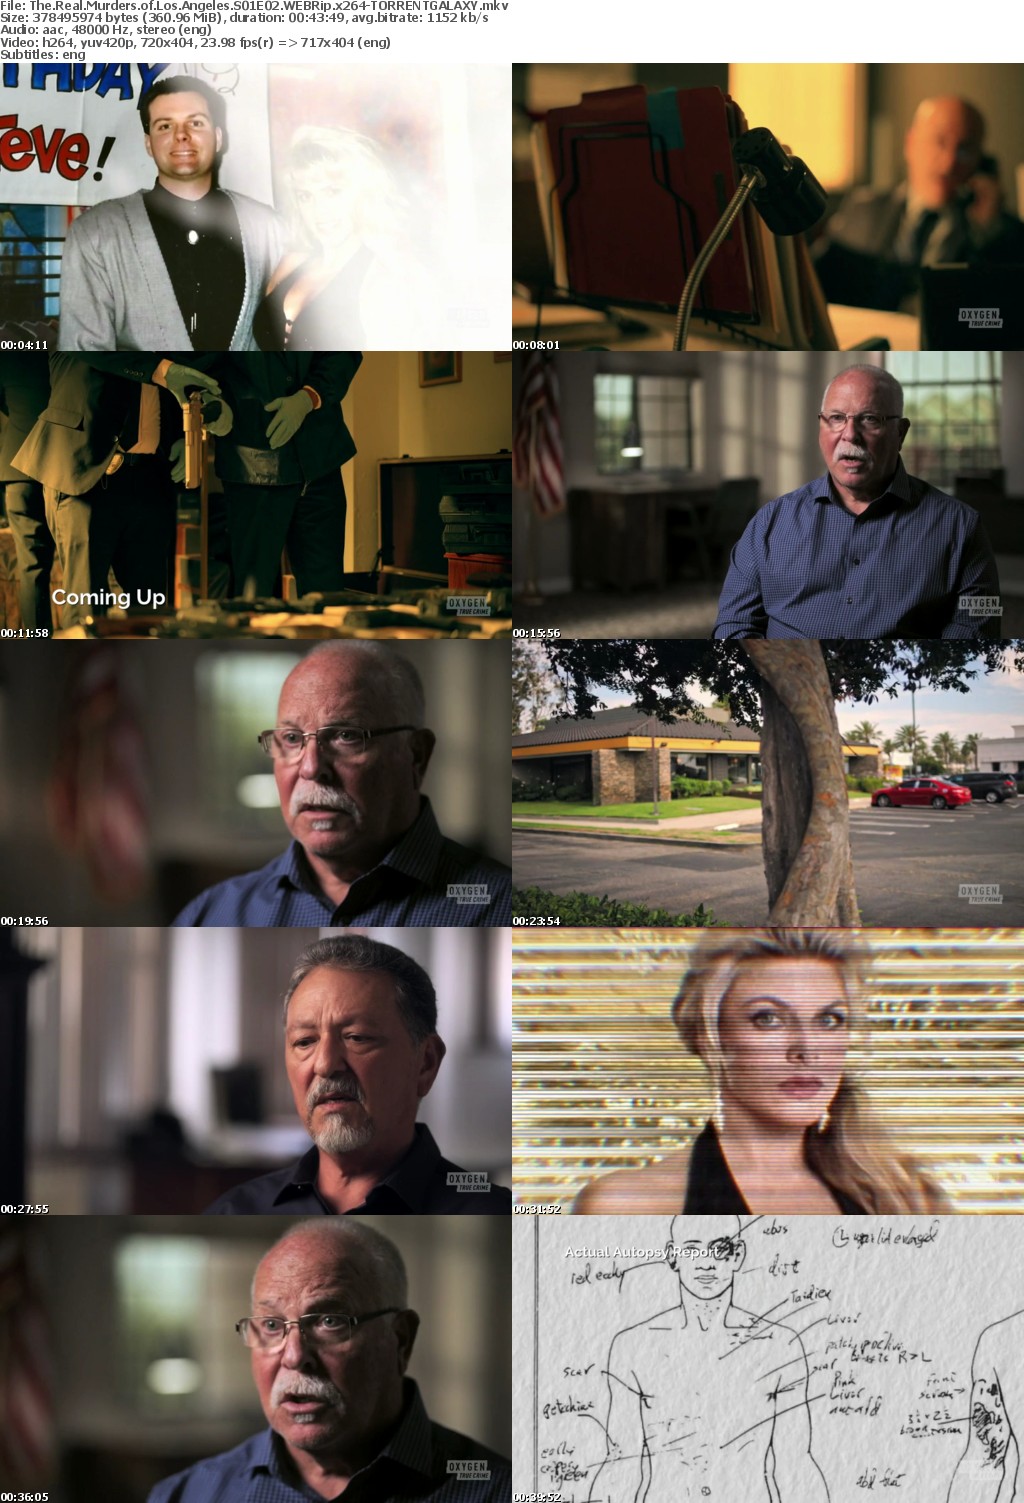 The Real Murders of Los Angeles S01E02 WEBRip x264-GALAXY